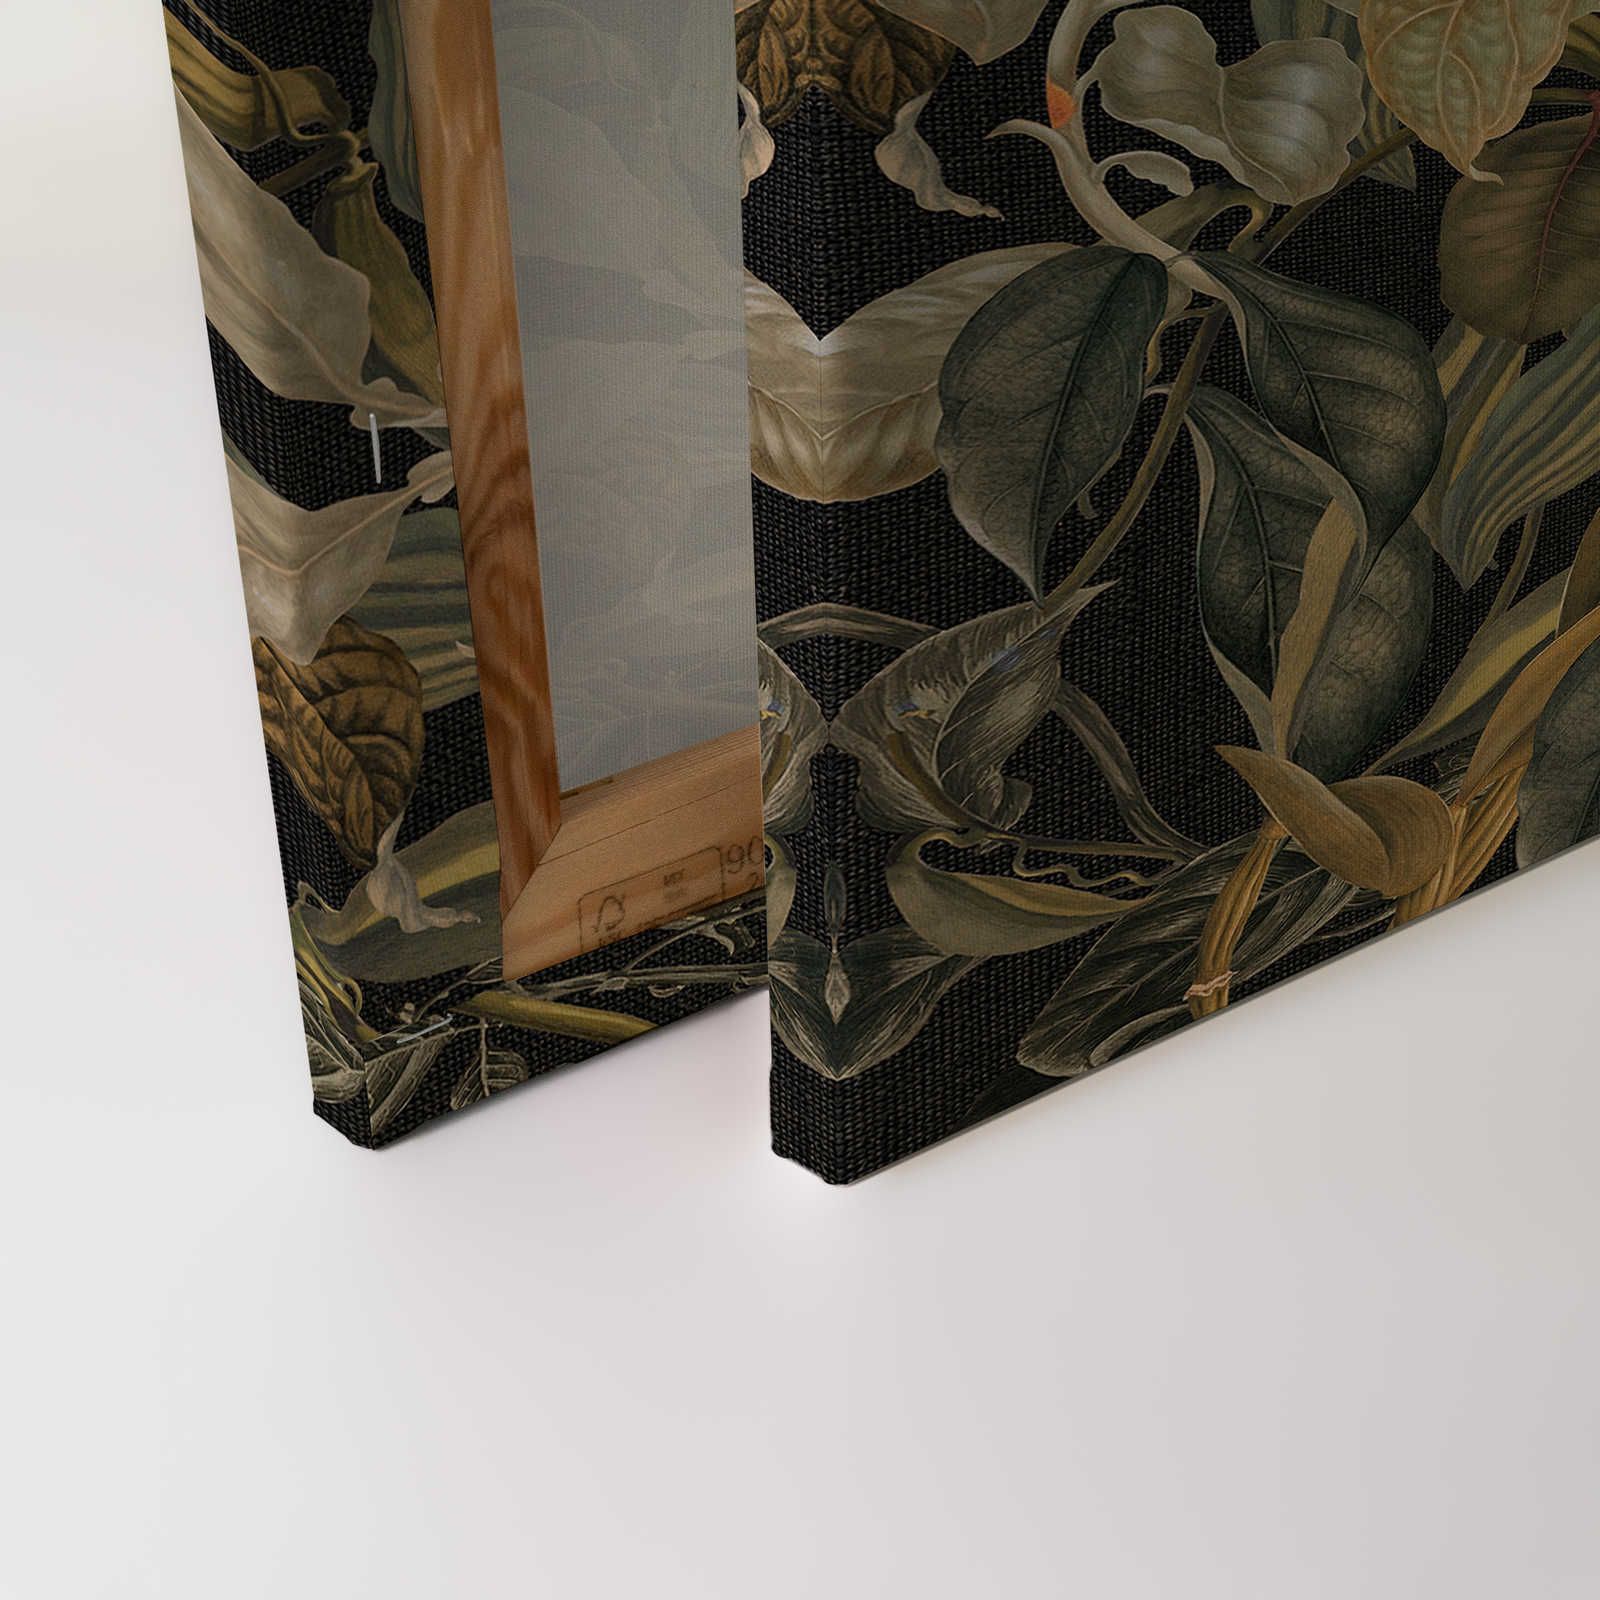             Botanical Canvas Painting with Orchids & Leaves Motif - 0.90 m x 0.60 m
        